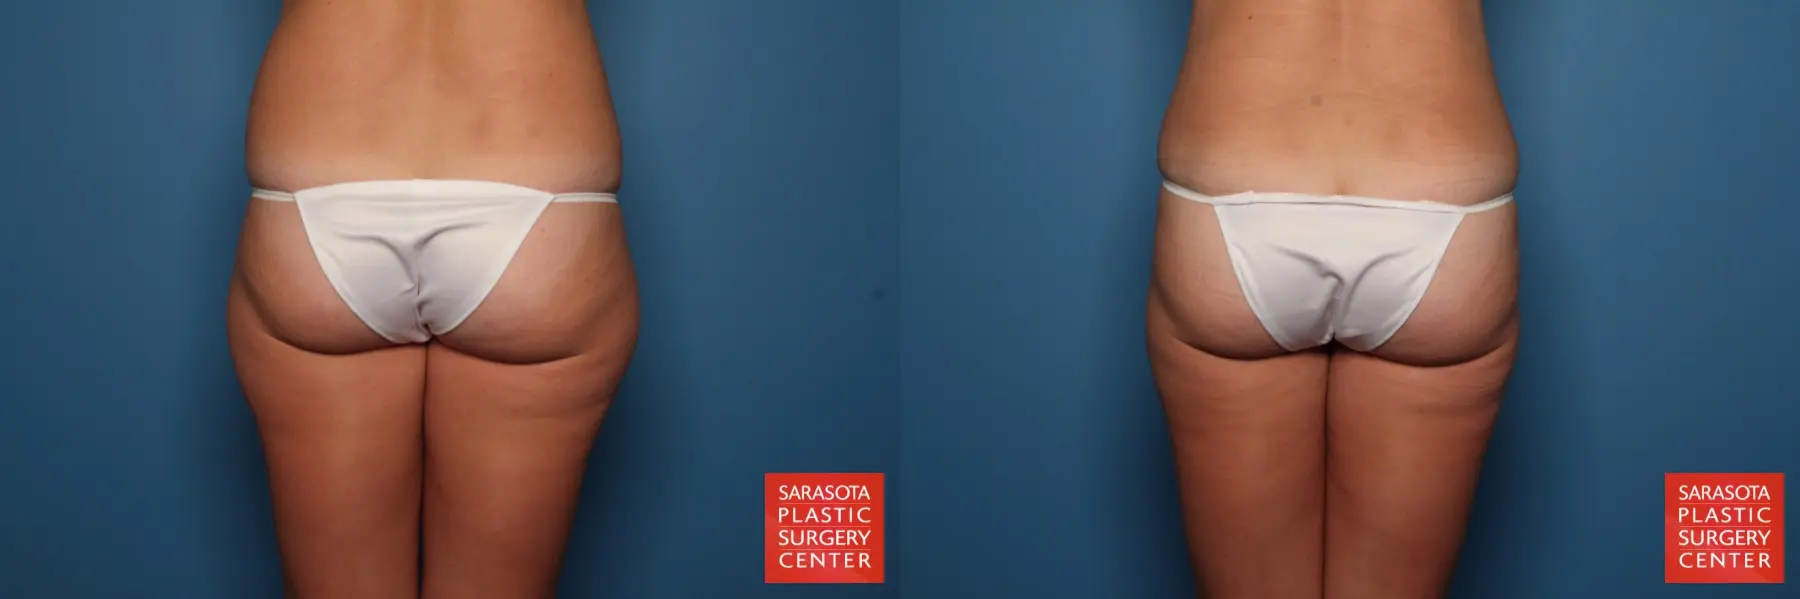 Liposuction: Patient 2 - Before and After 4